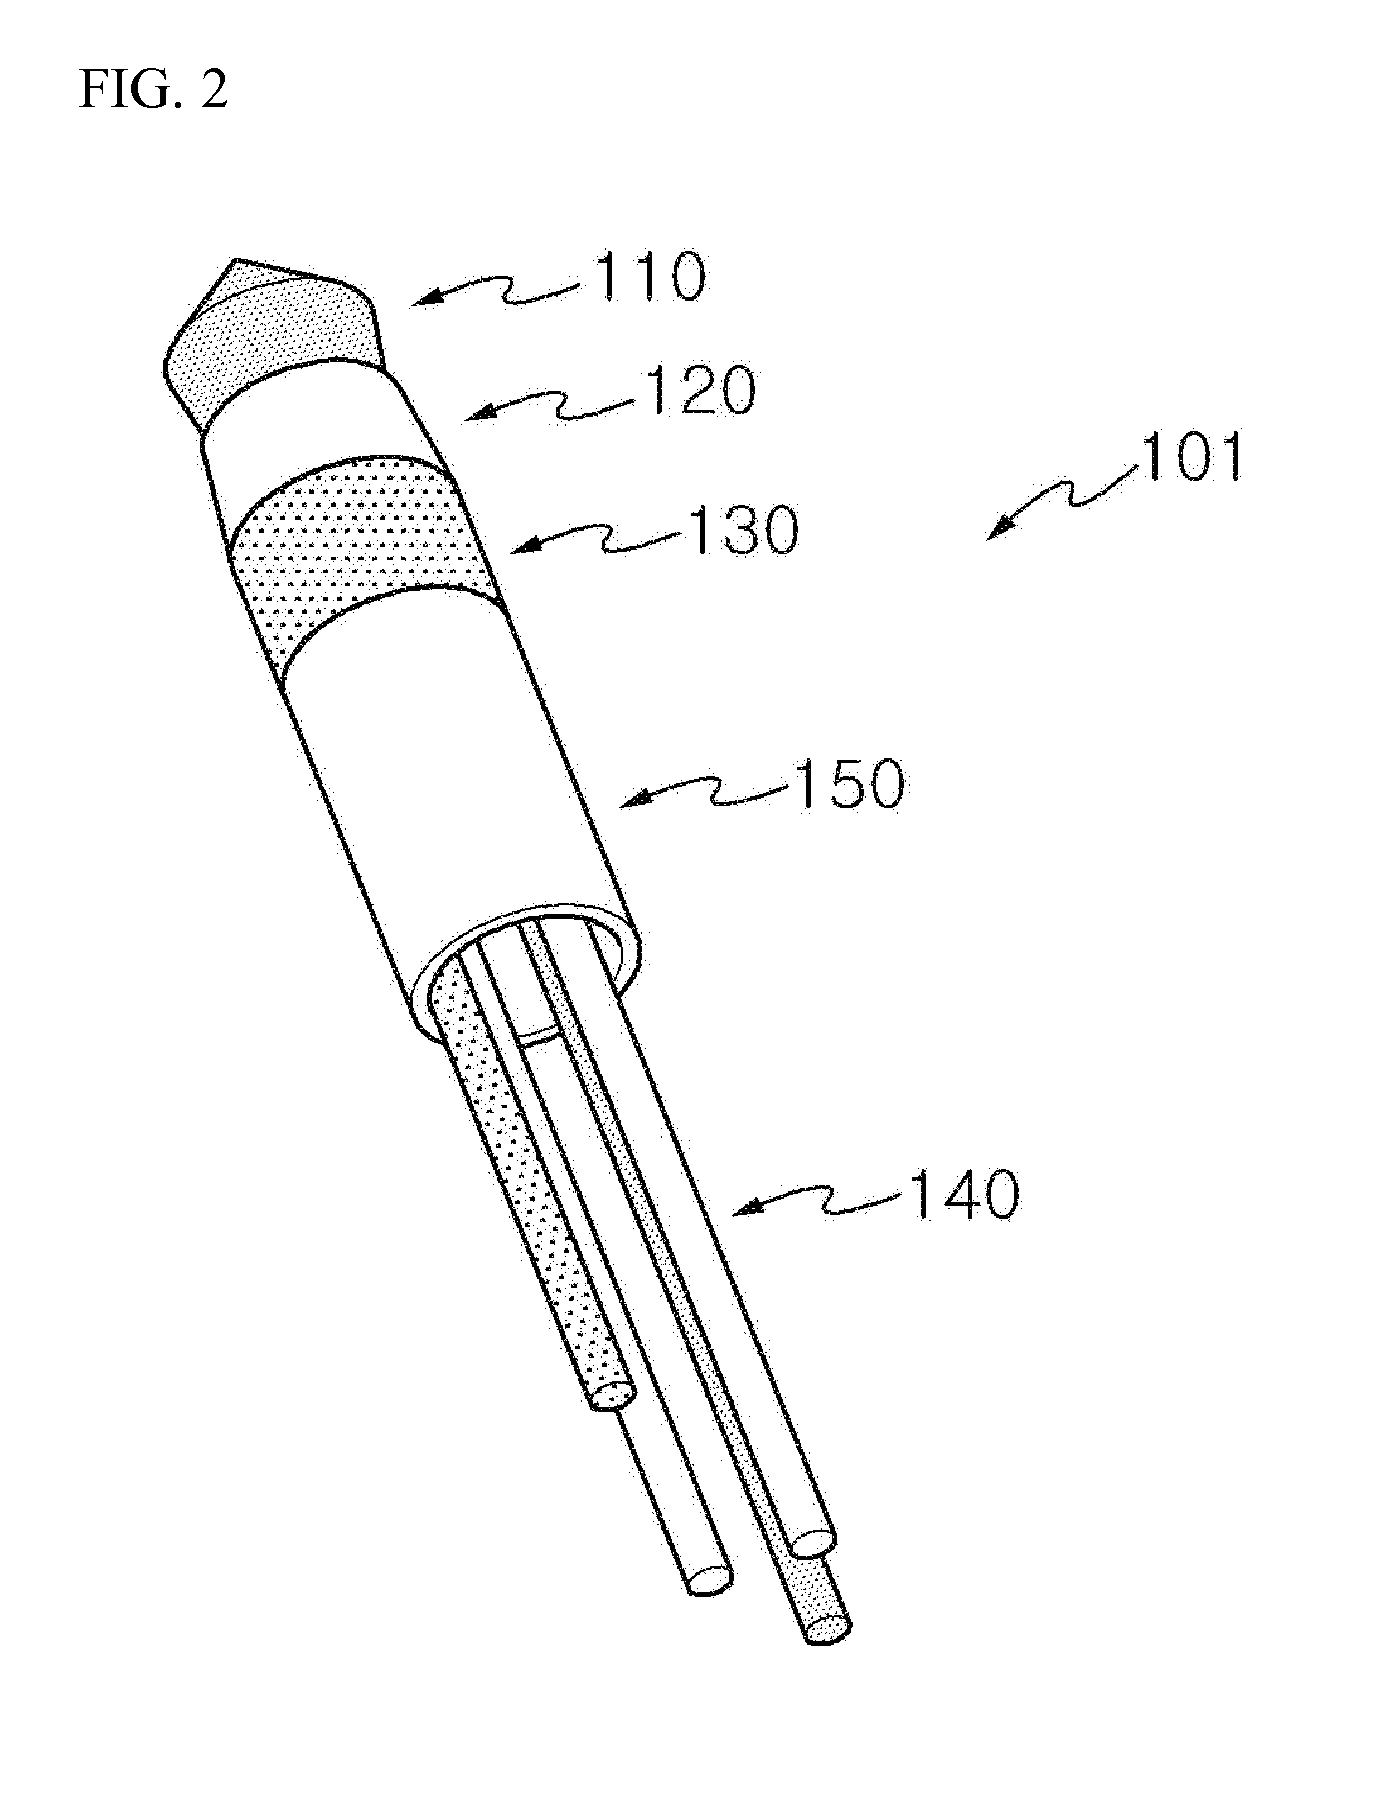 Direction-controllable electrode body for selectively removing bodily tissue, and guide pipe